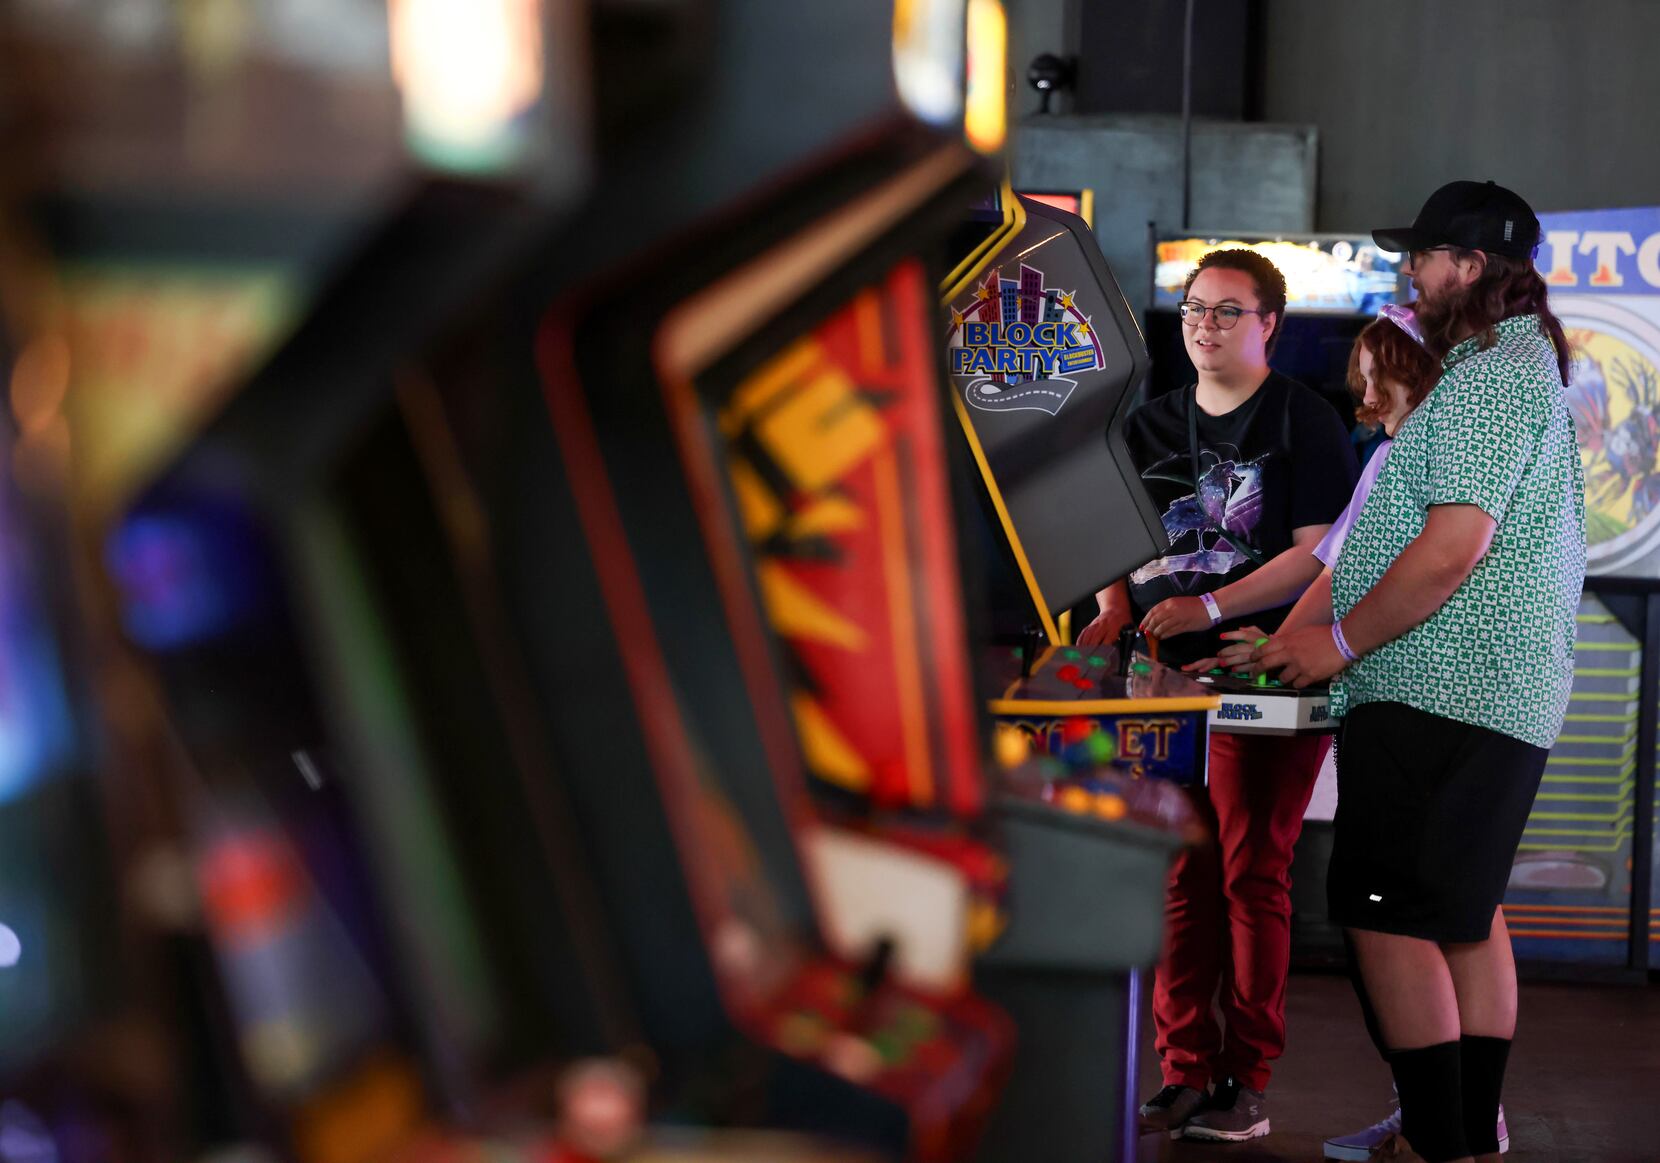 Why Dave & Buster's is bullish about the summer